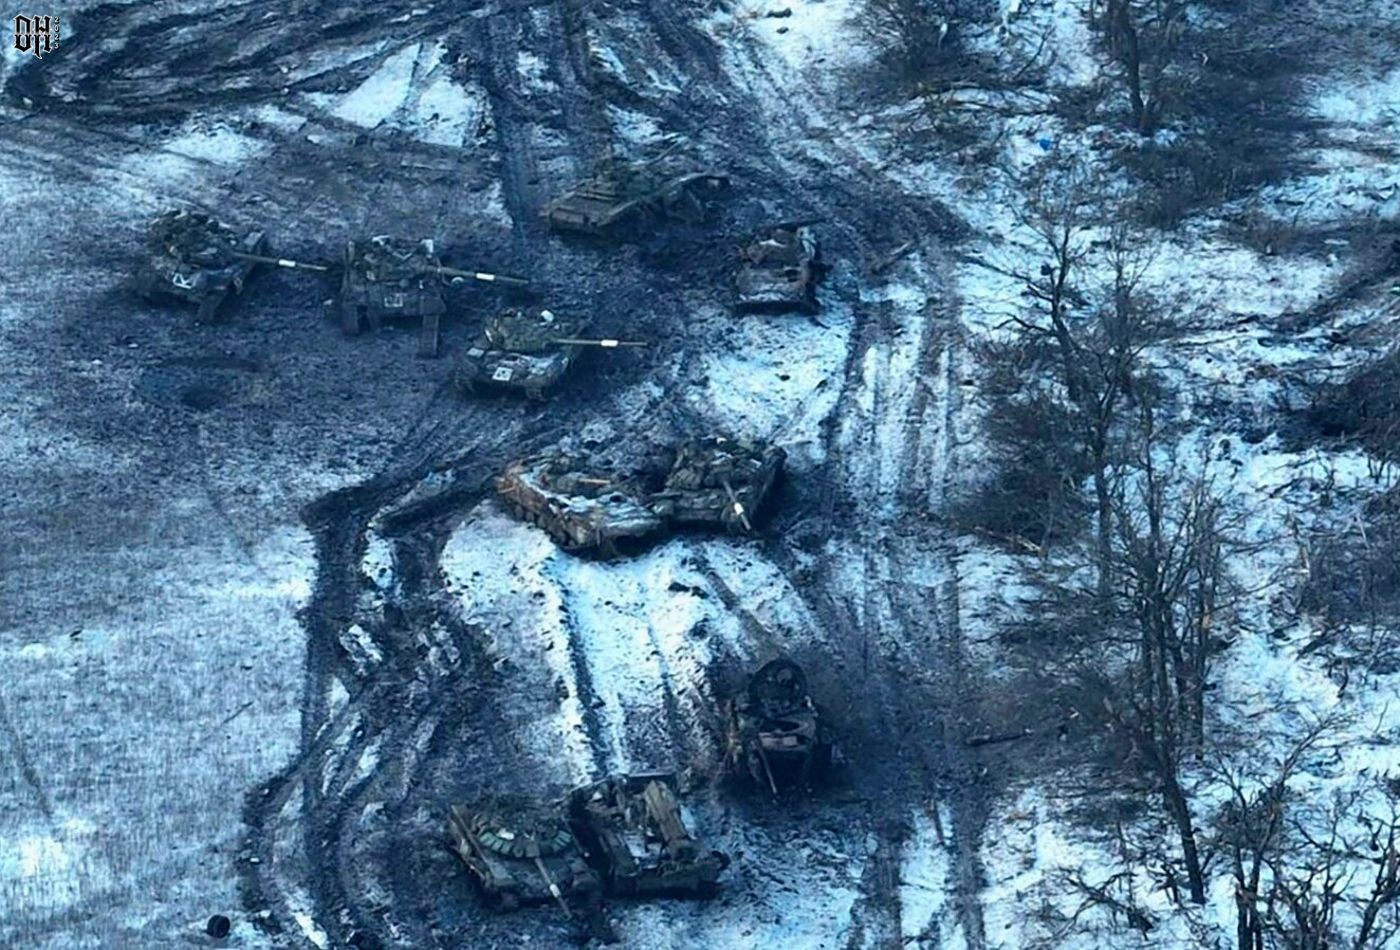 DH - Ukraine~Russia conflict - 1611 - damaged Russian tanks are seen in a field after attempti...jpg